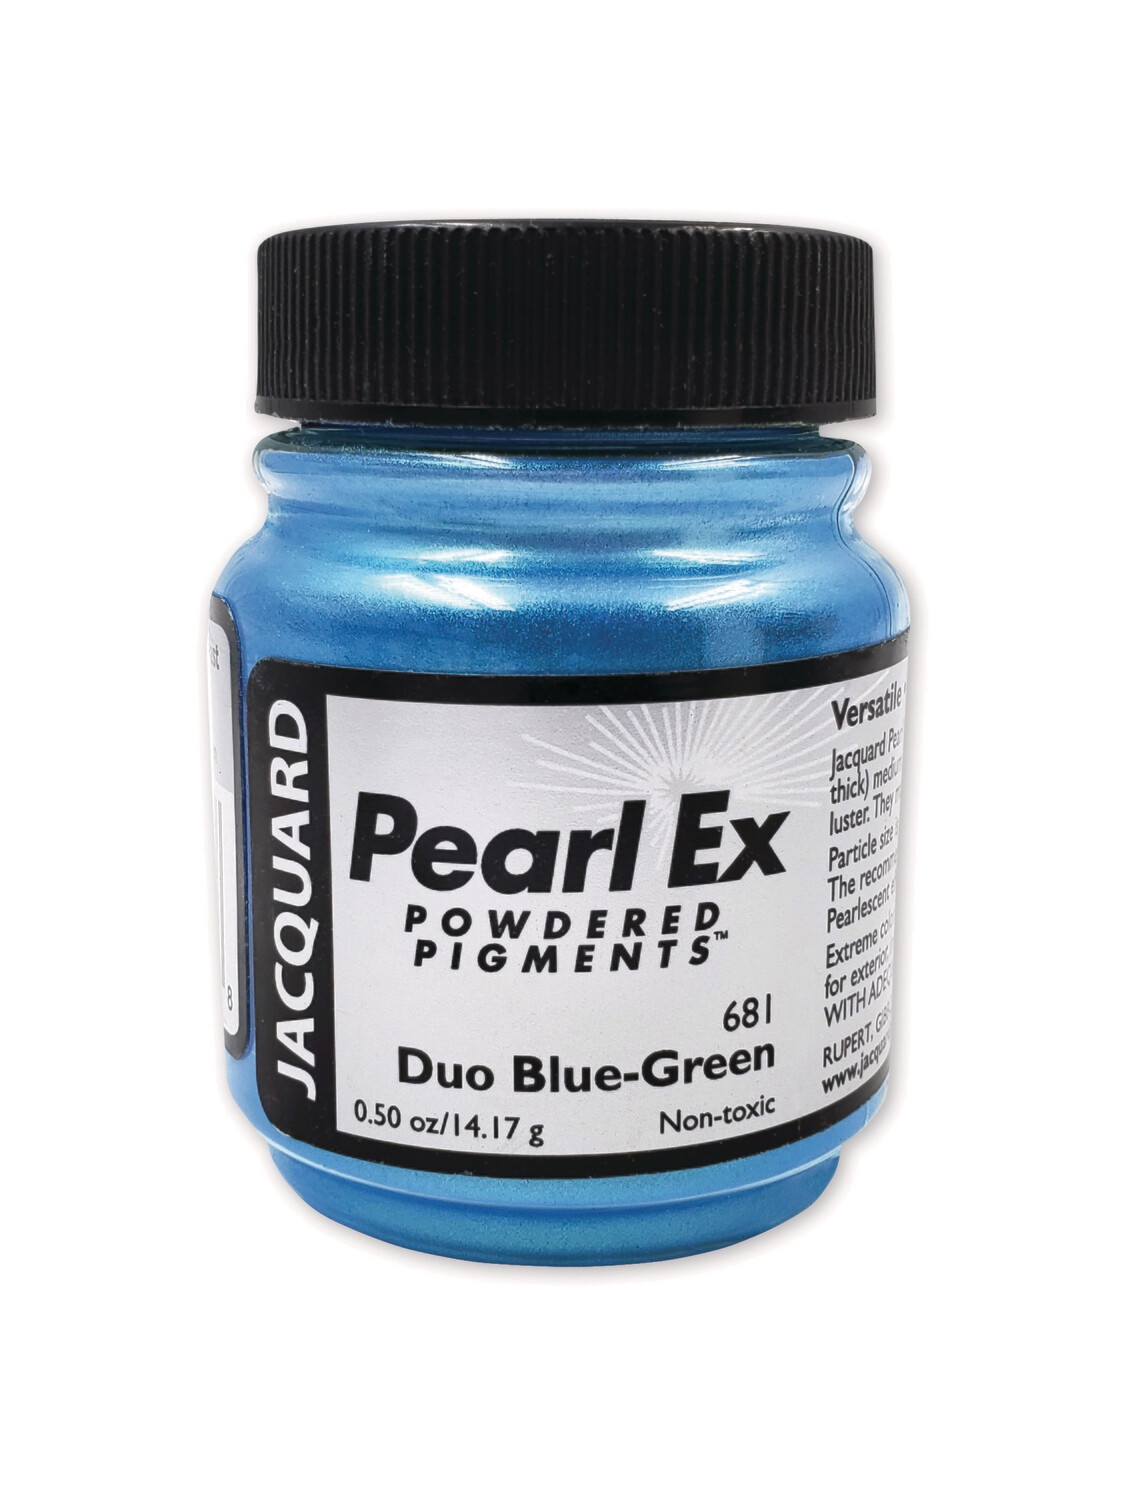 Pearl Ex Powdered Pigments-Duo Blue/Green